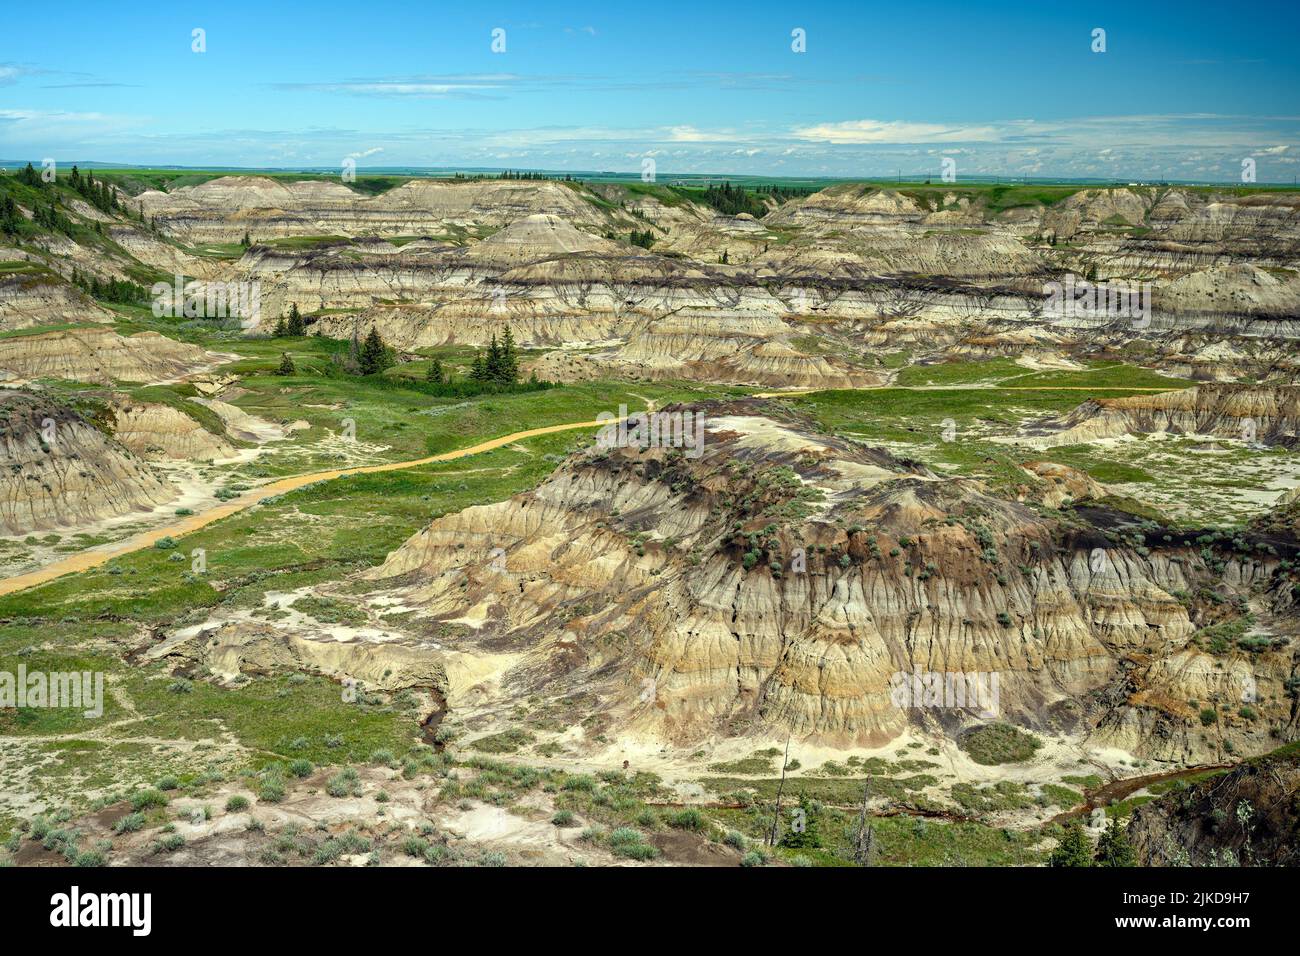 Horseshoe Canyon in the Red Deer River Valley, Canadian Badlands on the North Dinosaur Trail, Drumheller, Alberta, Canada. Stock Photo